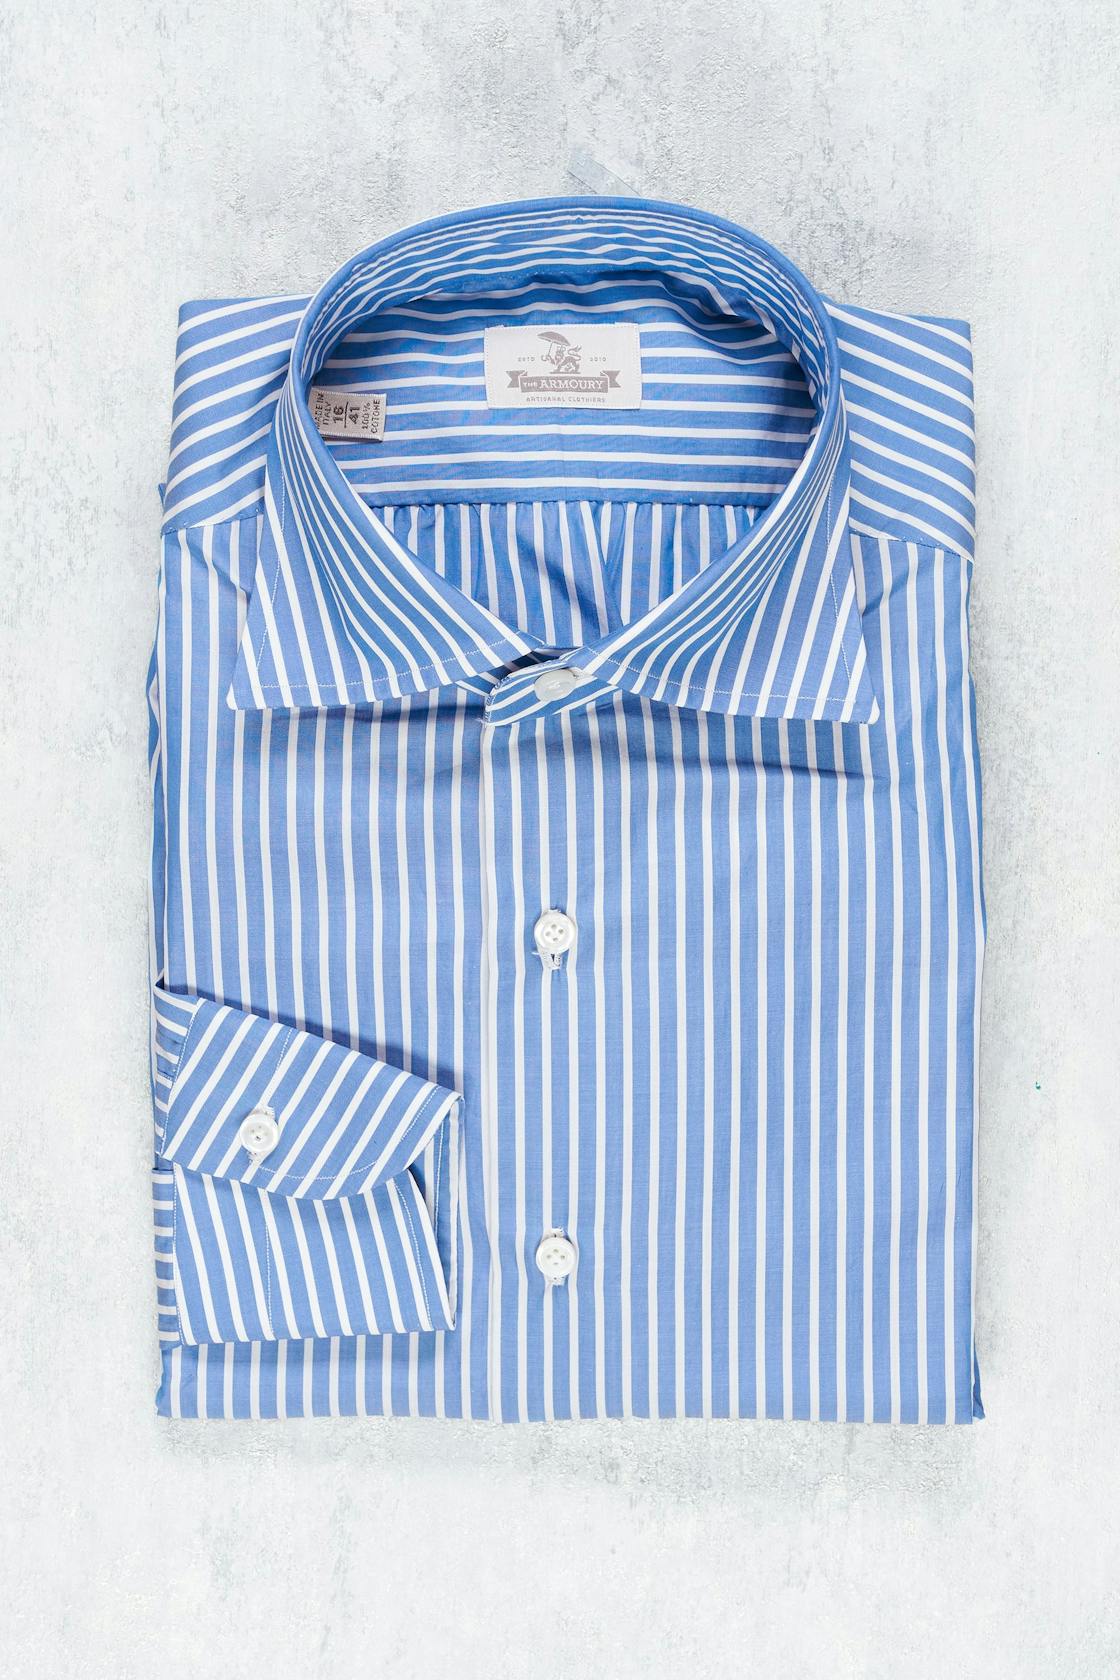 The Armoury Blue with White Butcher Stripe Carlo Riva Cotton Shirt